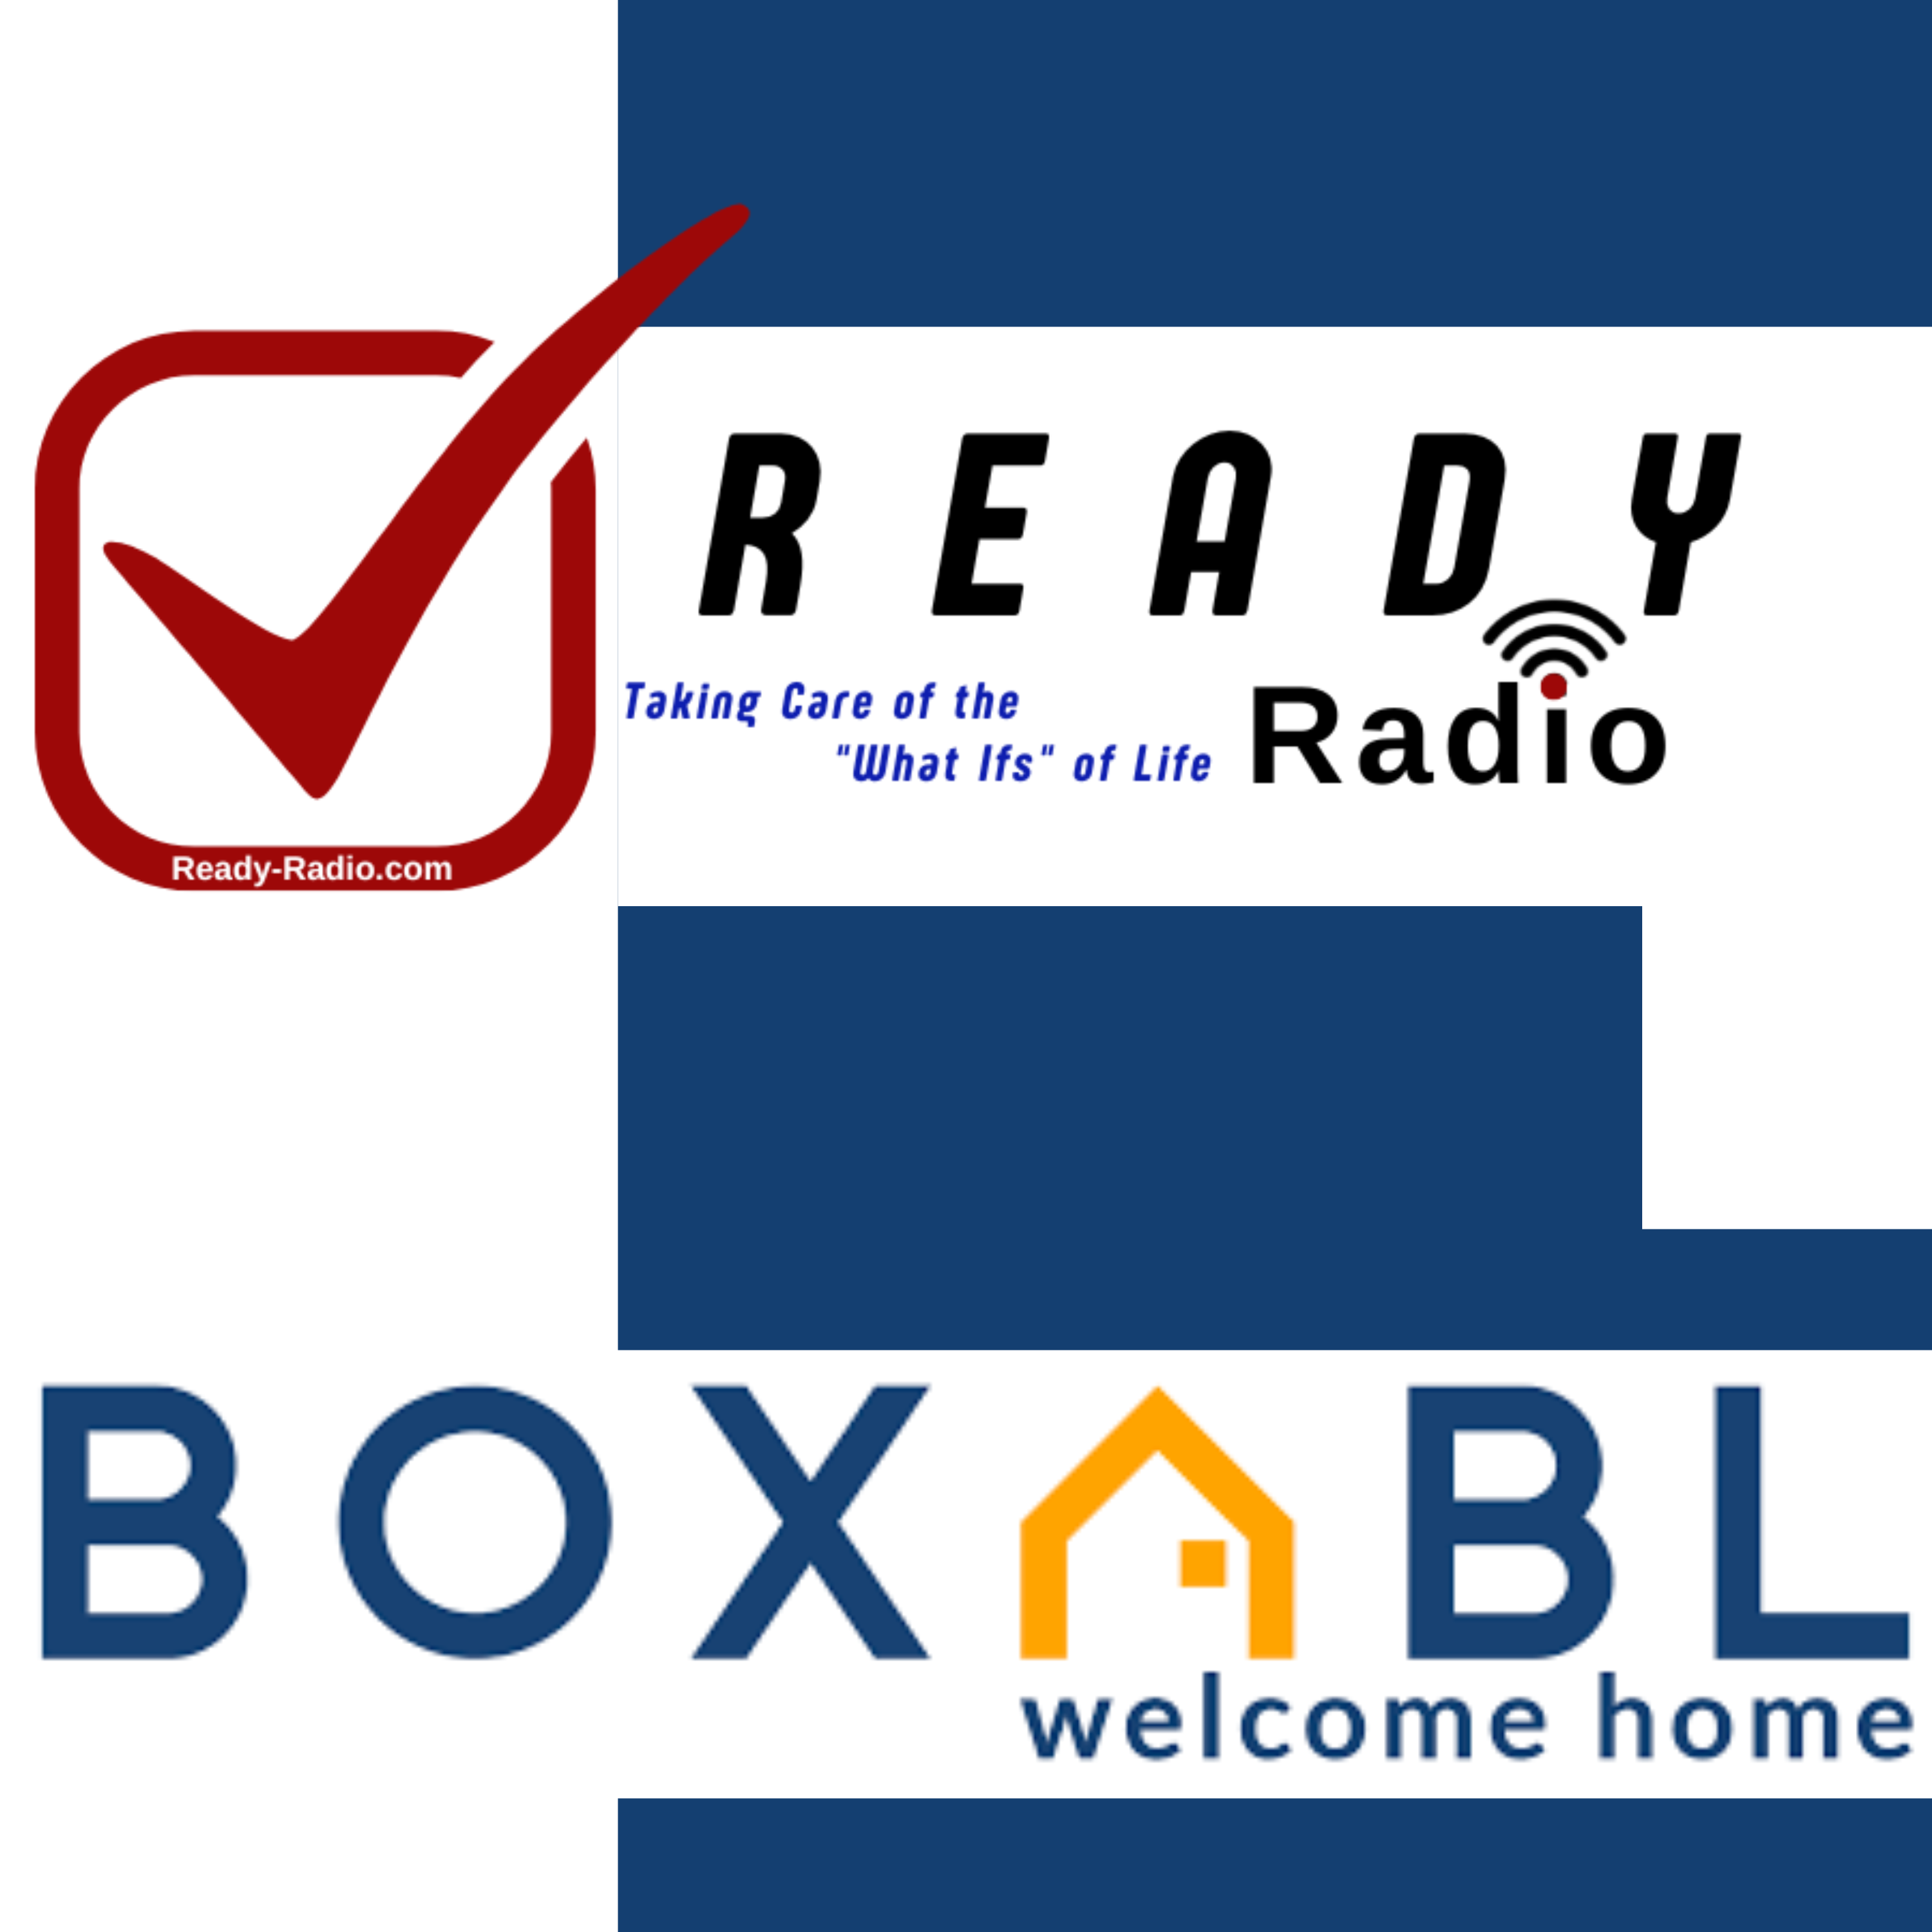 Boxabl: A Complete Home Right Out of the Box